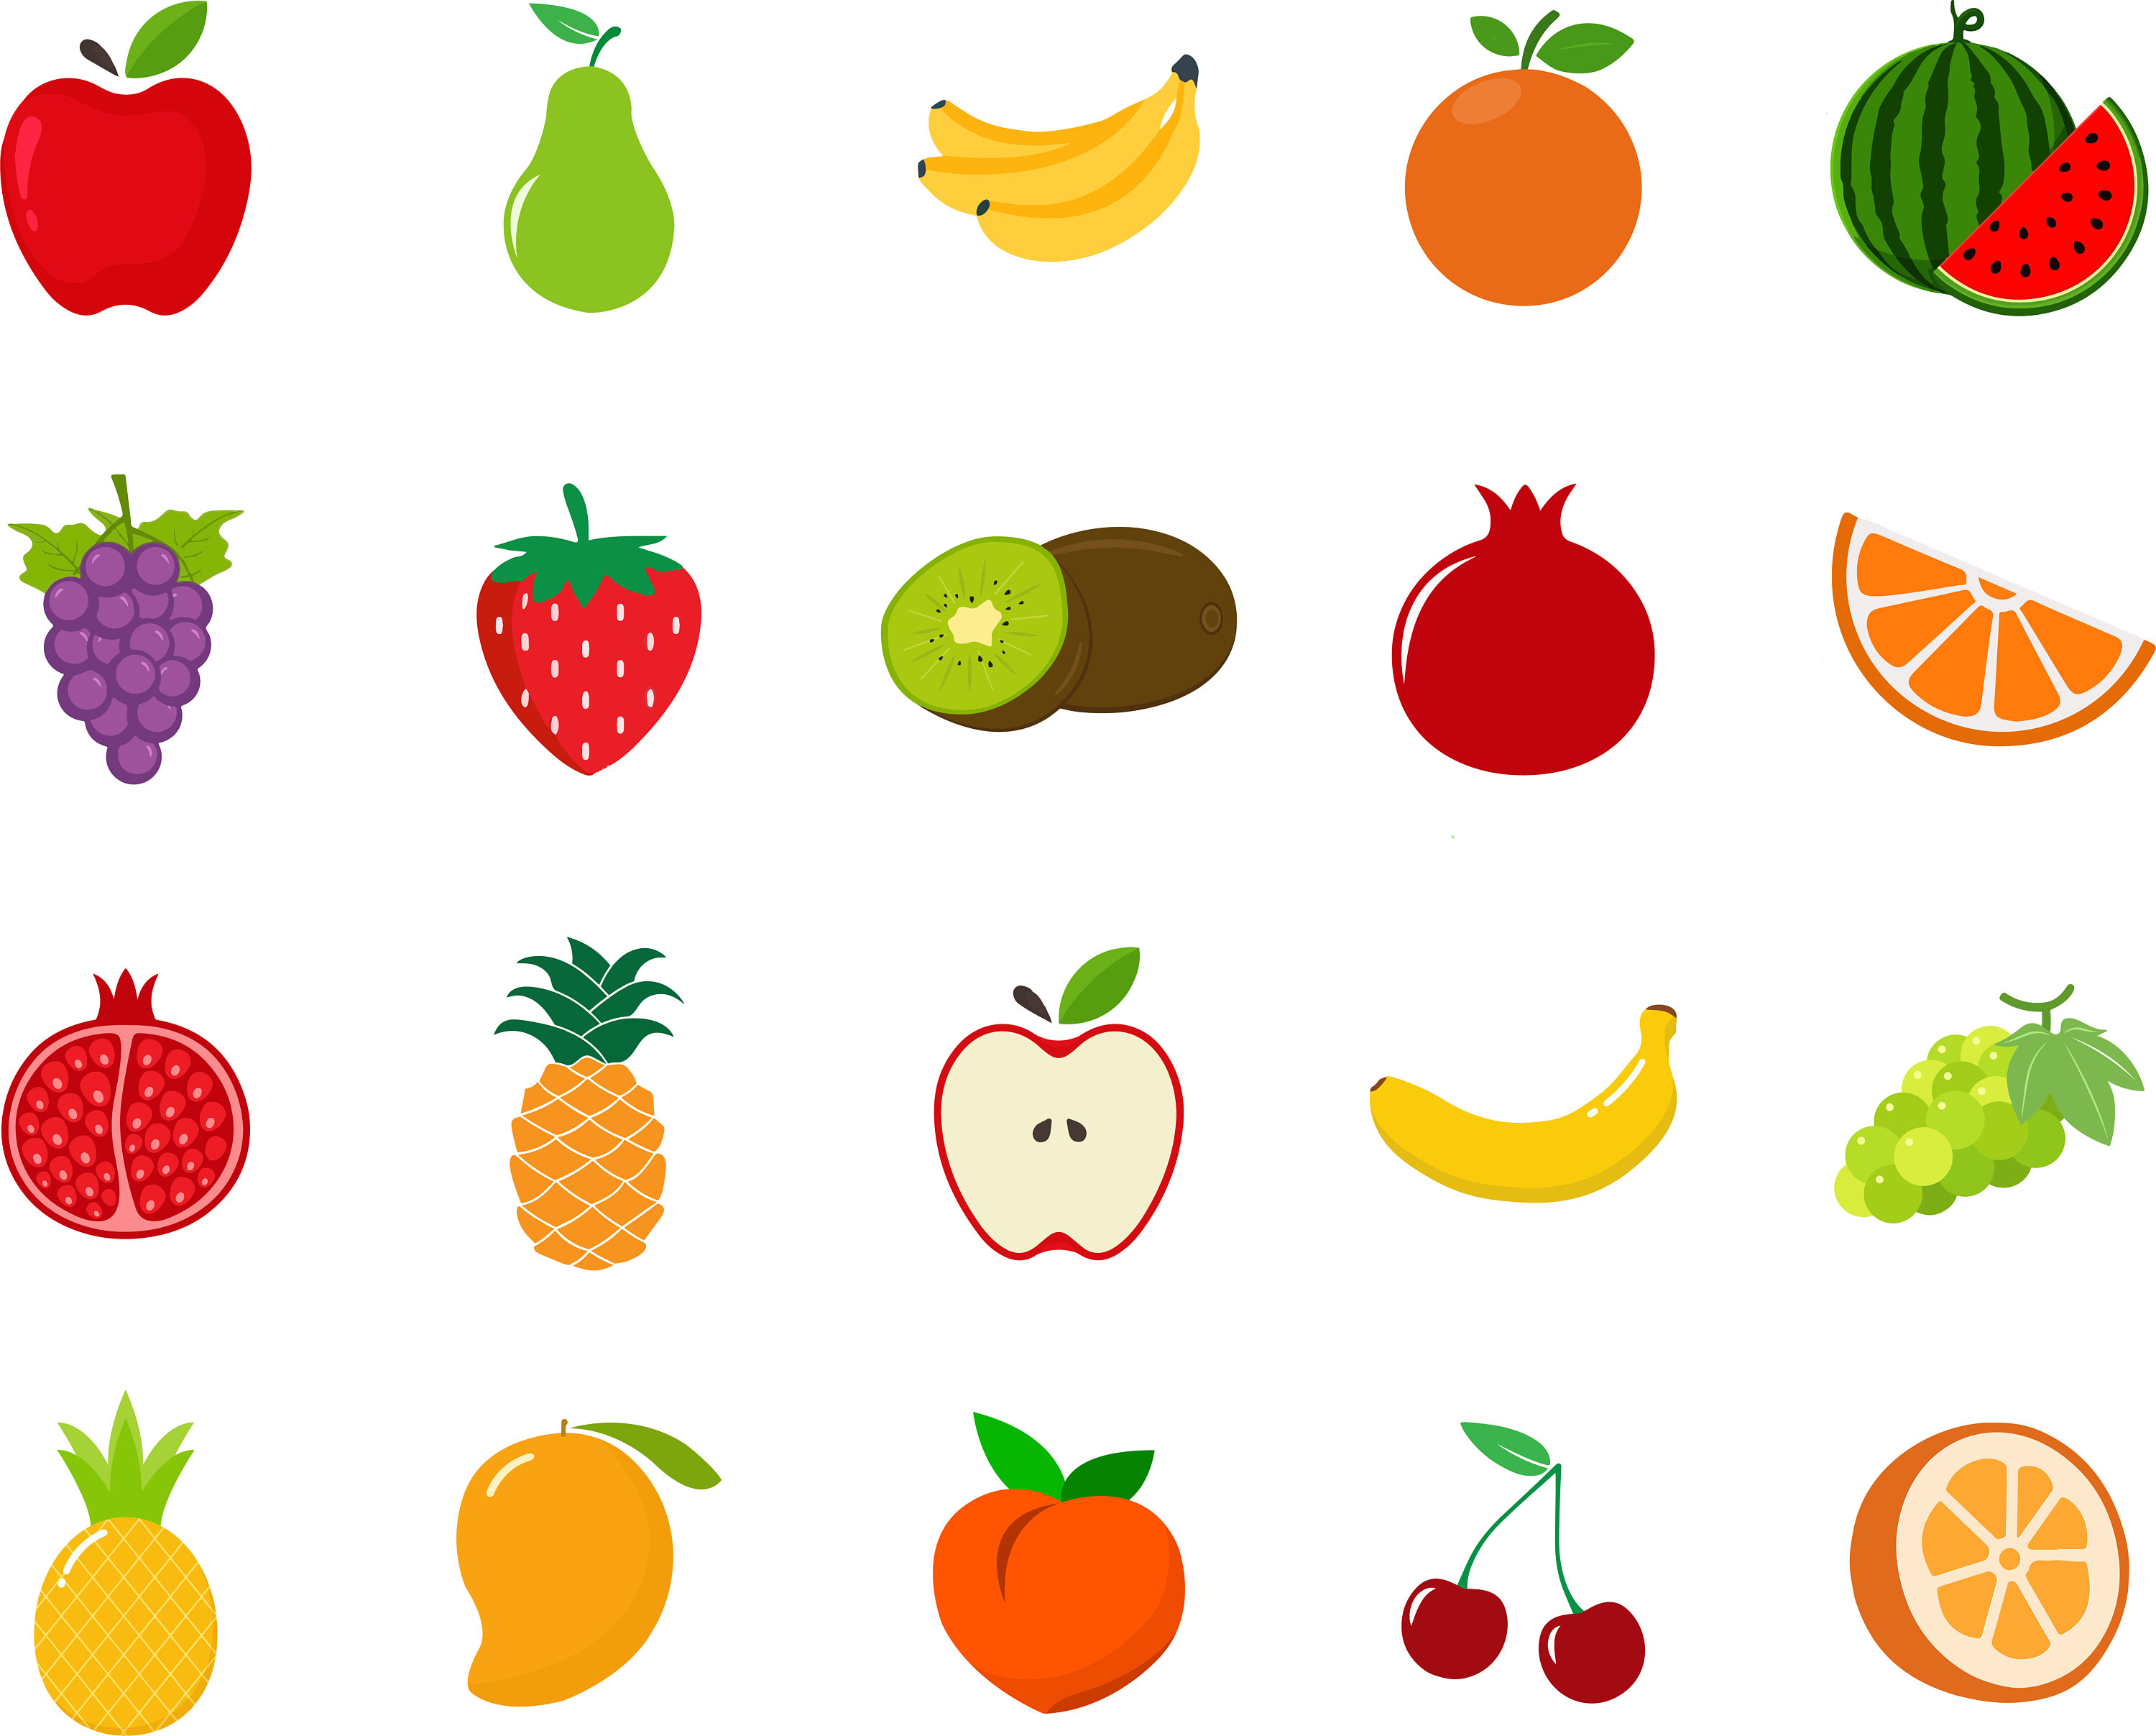 Fruit icons, Fruits Food SVG Fruits clipart vector SVG, print file,  printable, Colorful Fruits Clipart, Cute Fruits Icons, instant download